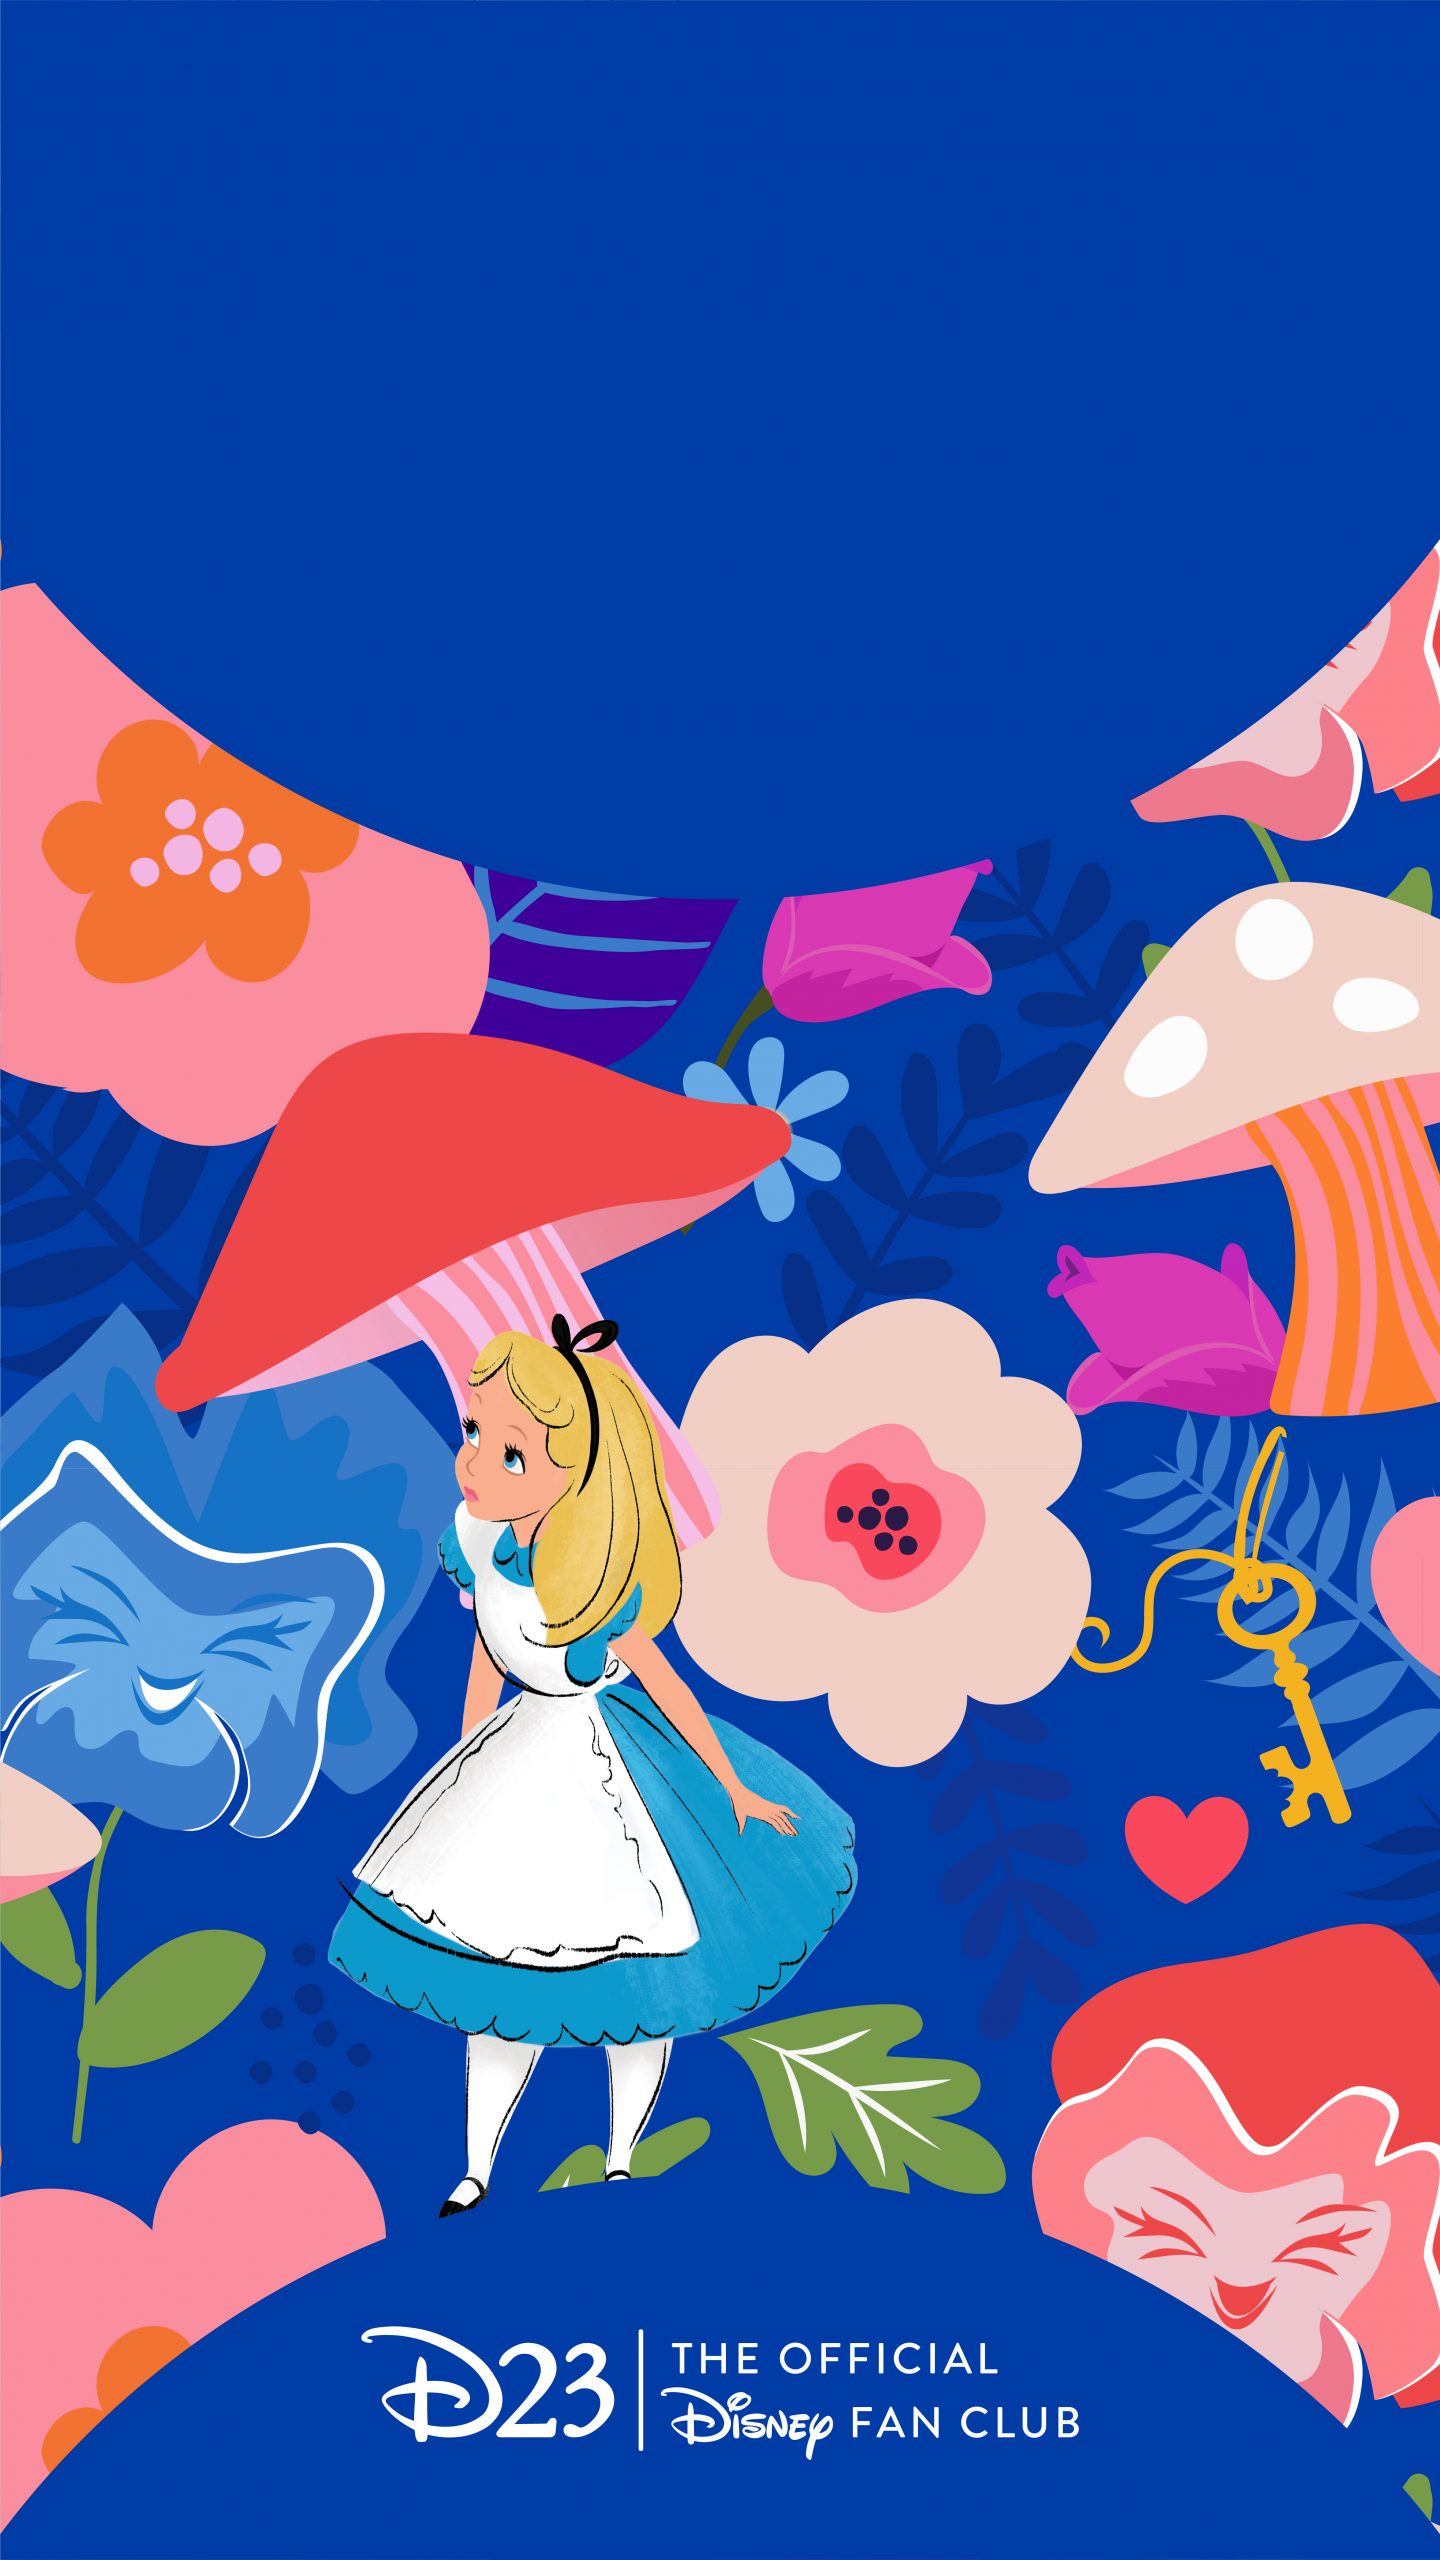 Make Your Phone A Wonderland With These Wallpapers Celebrating 70 Years Of Alice In Wonderland D23